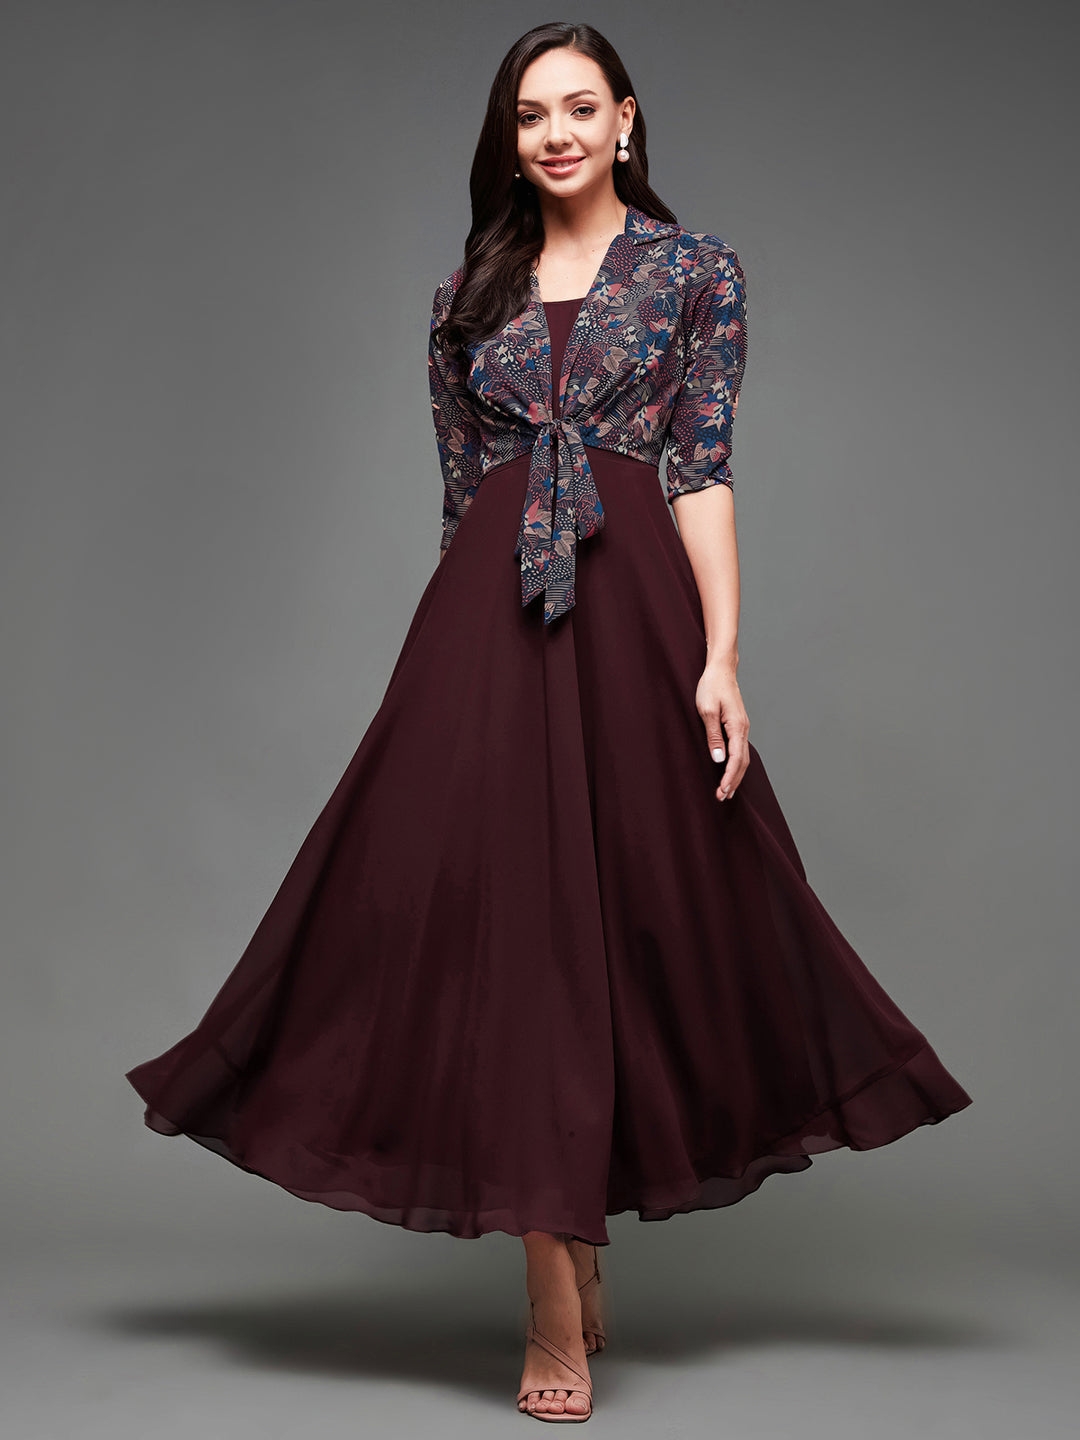 Multicolored-Base-Wine Floral Notched Collar 3/4 Sleeve Georgette Jacket Style Maxi Dress